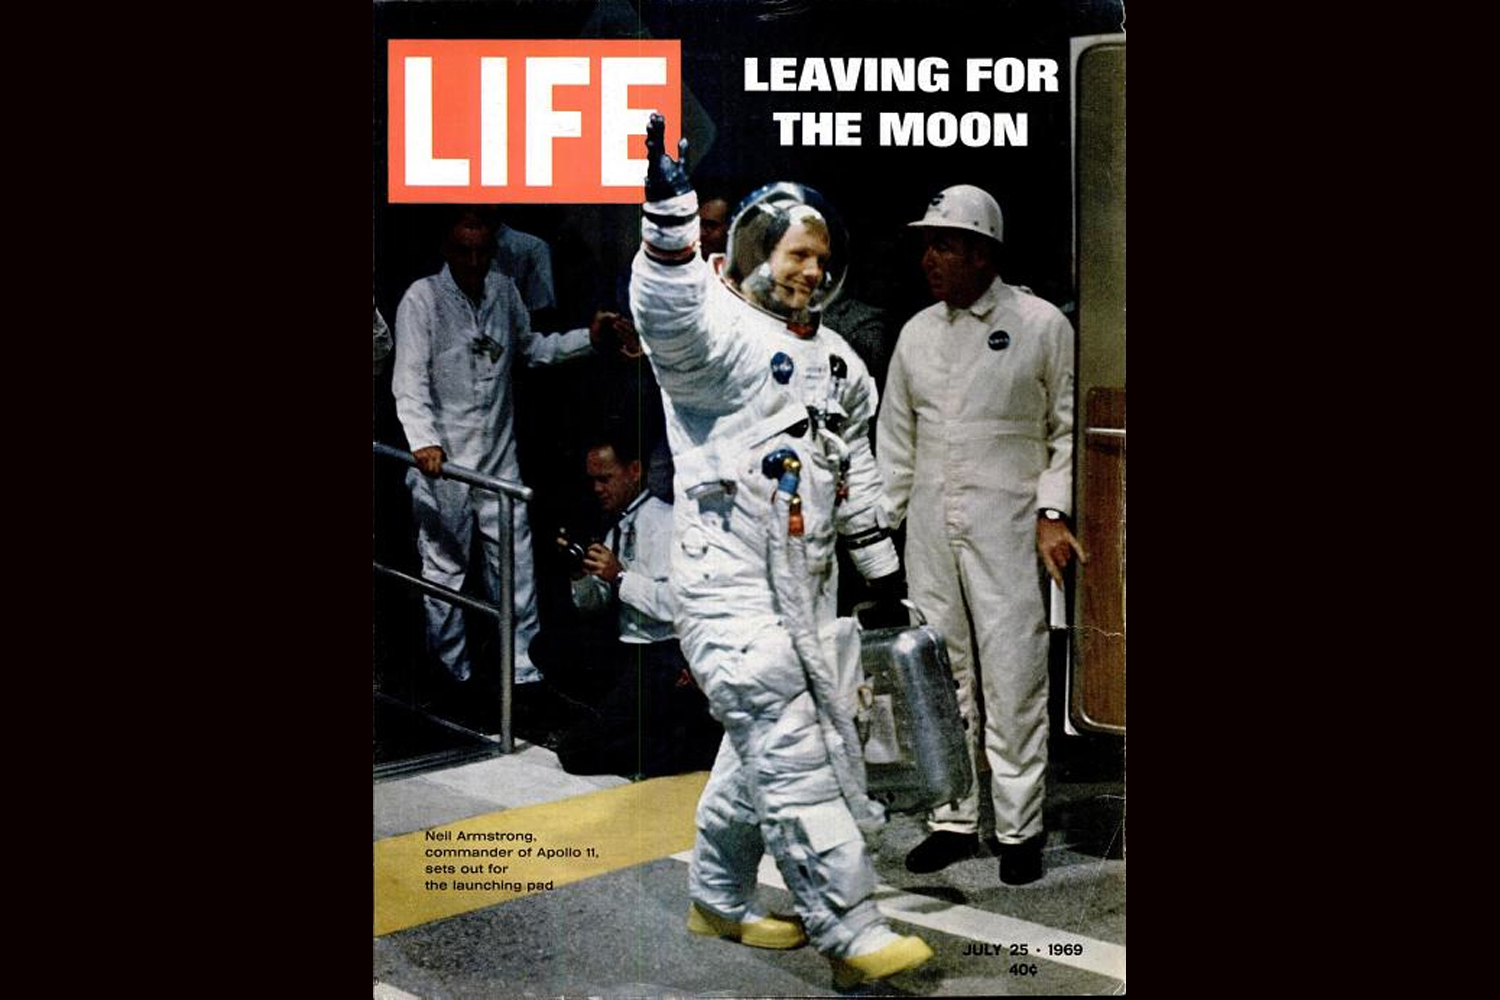 Neil Armstrong, LIFE magazine, July 25, 1969